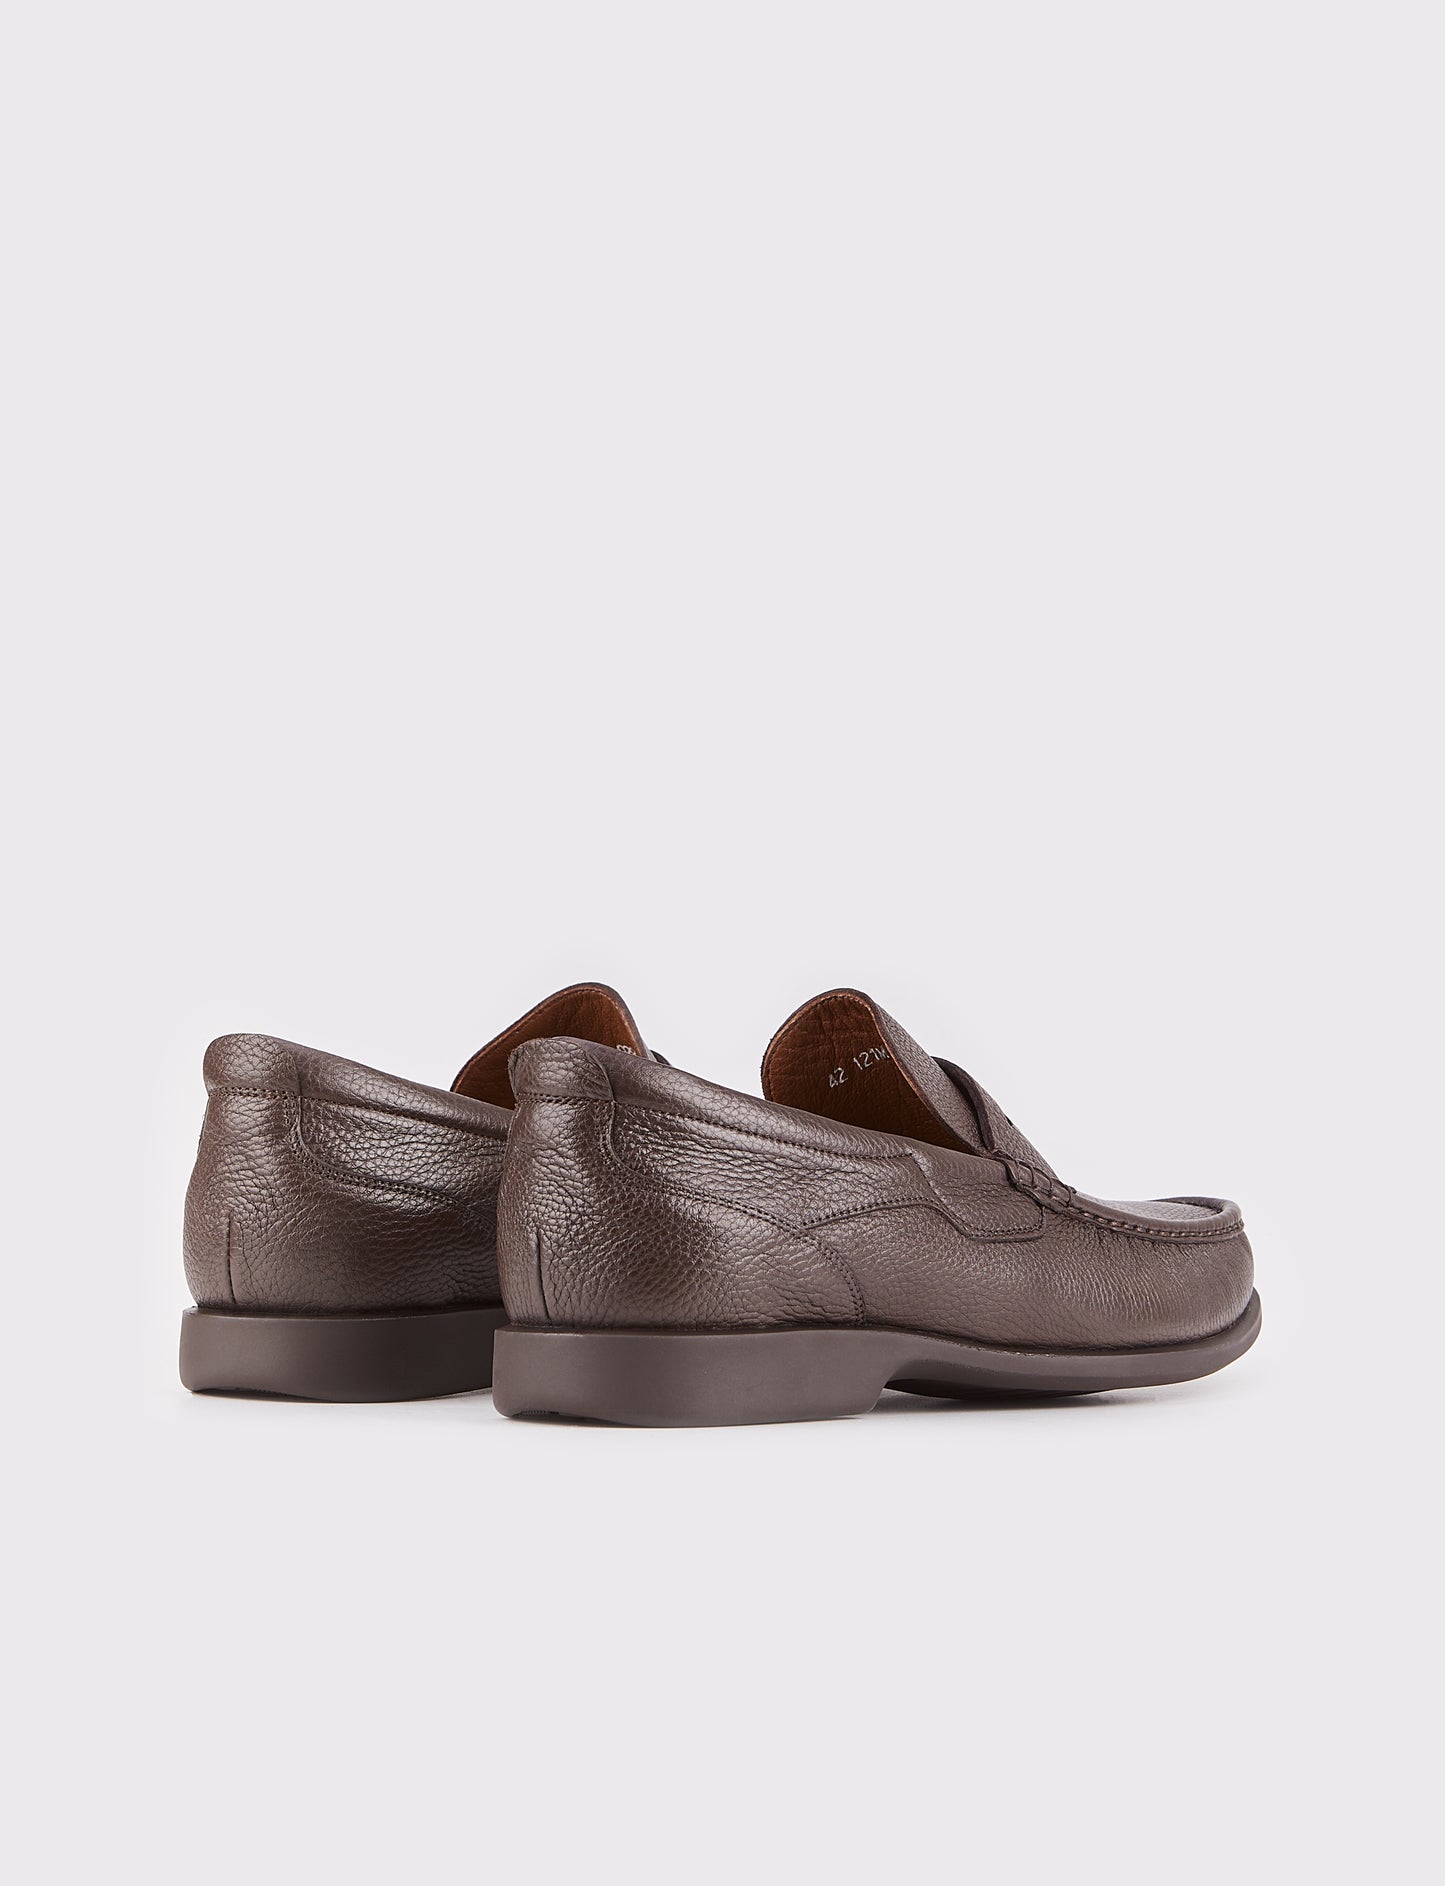 Men Brown Genuine Leather Slip On Penny Loafers